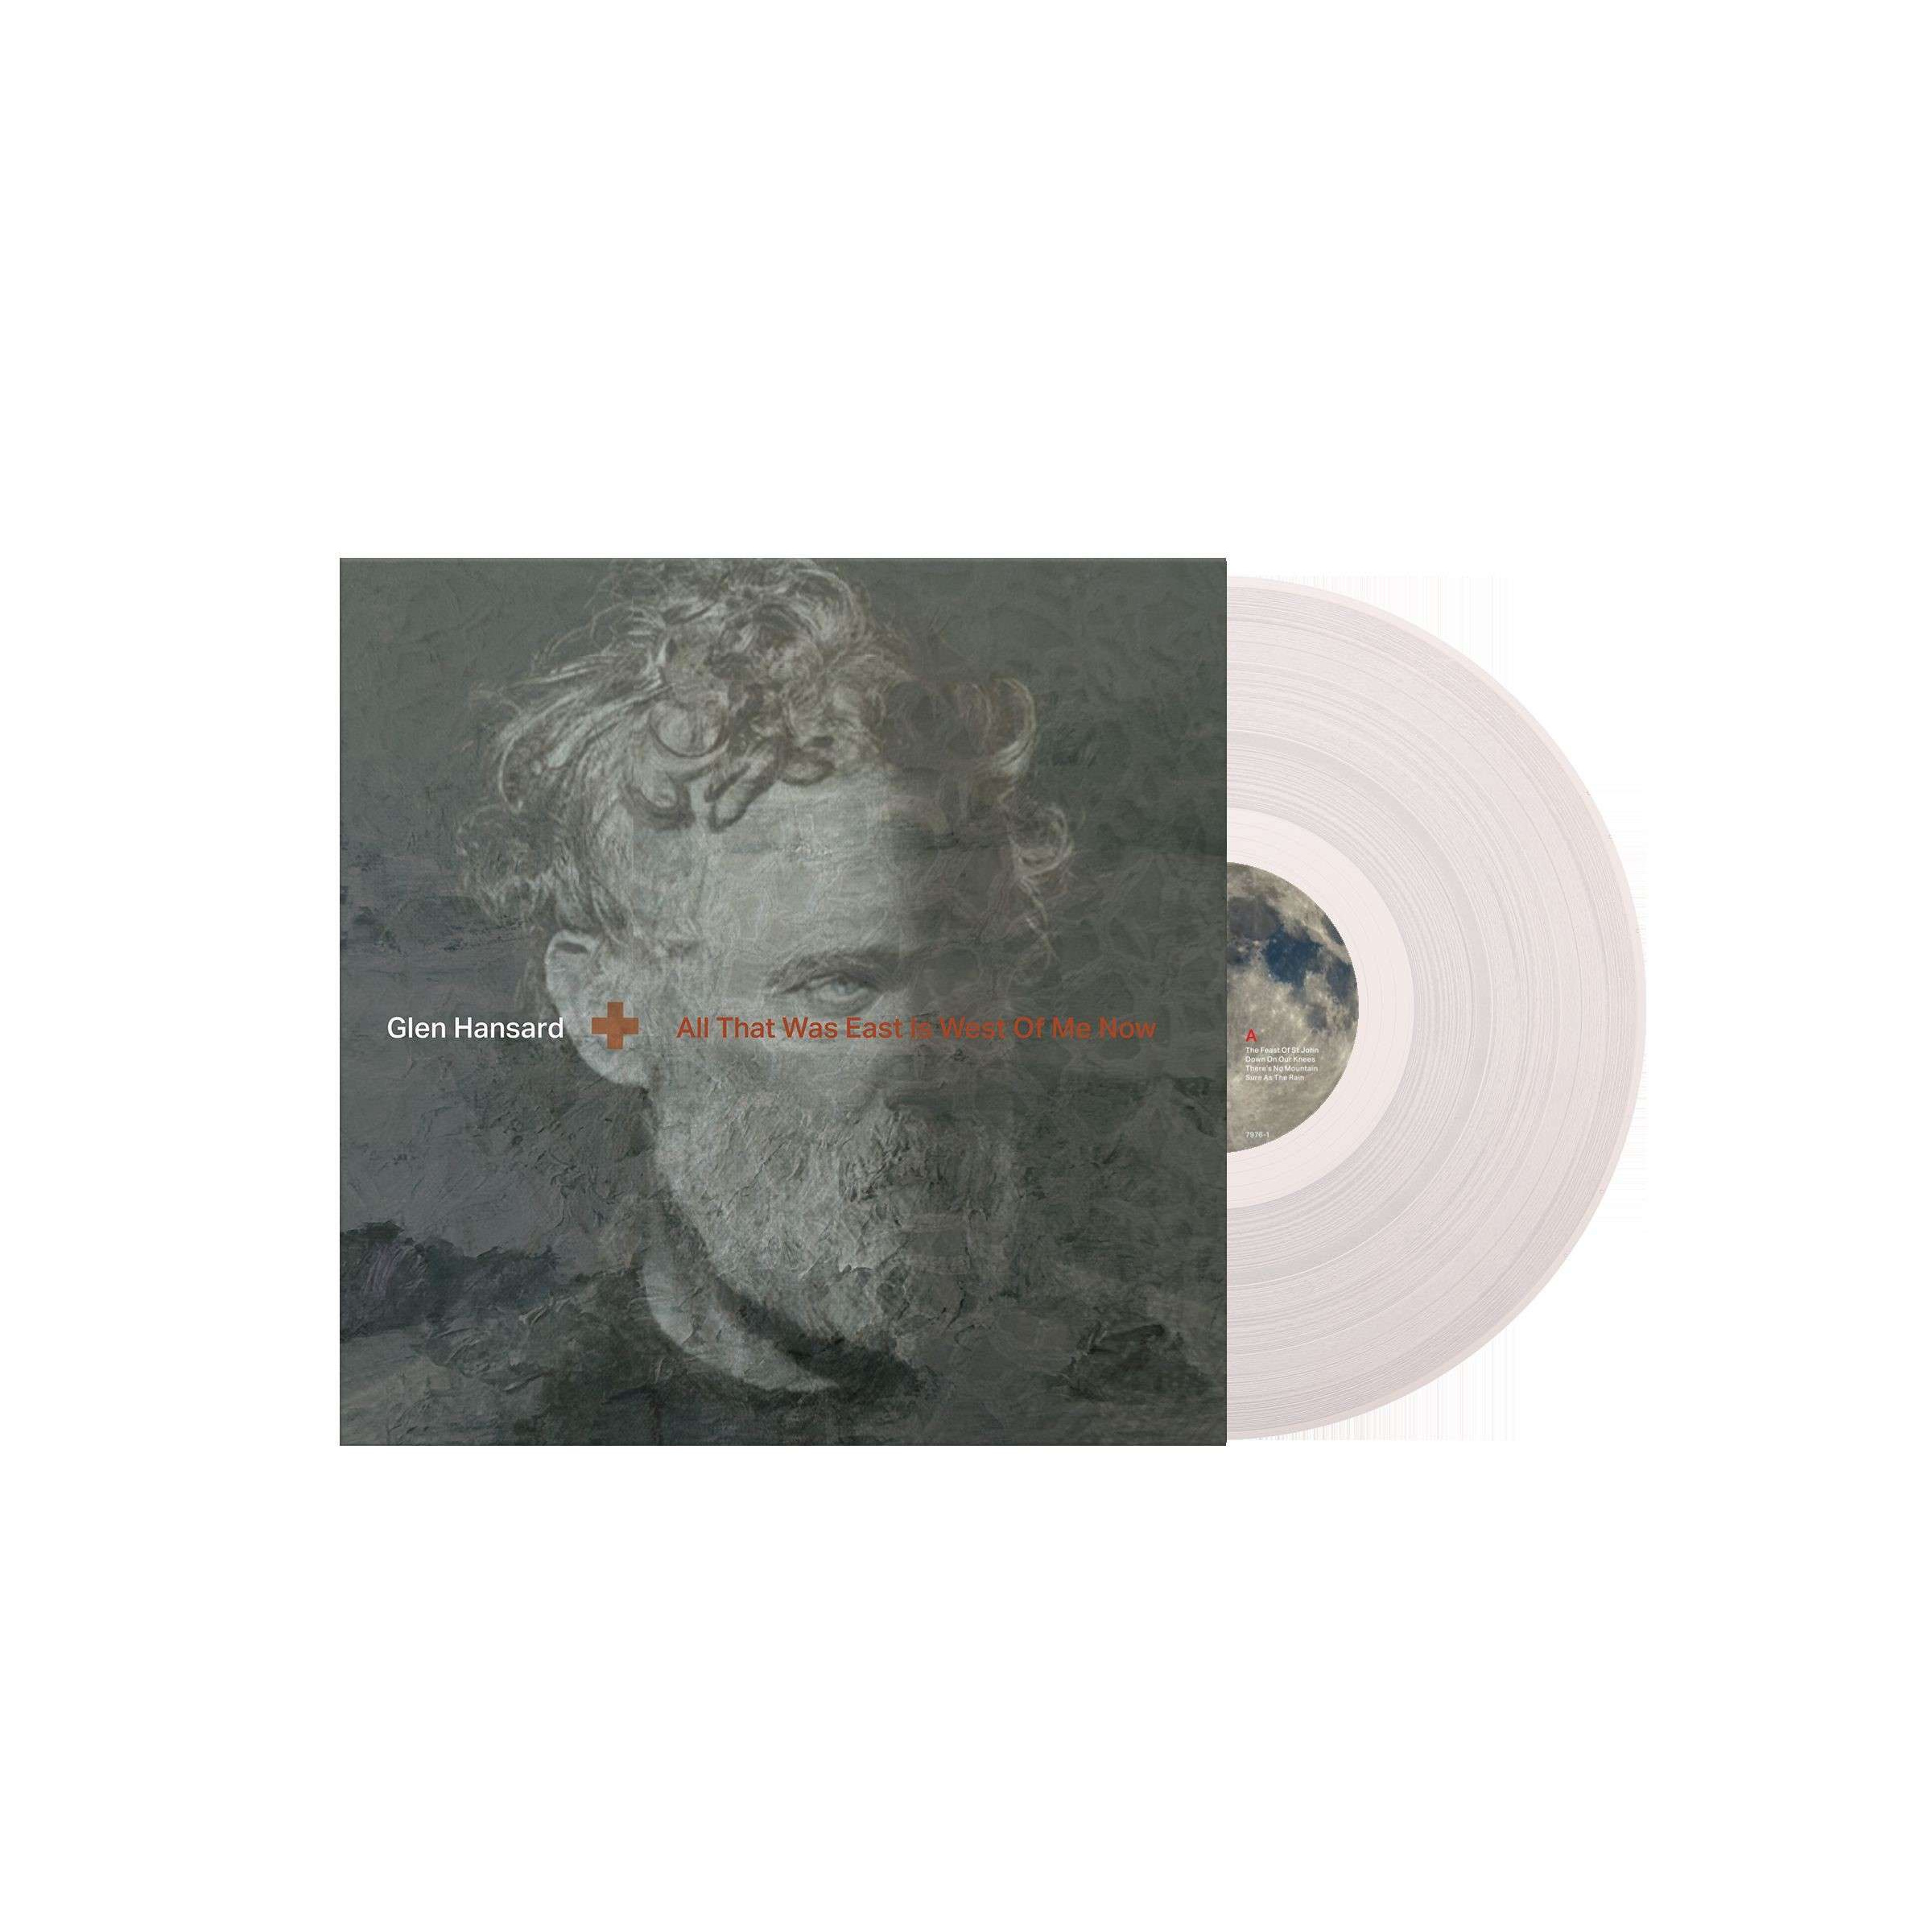 ALL THAT WAS EAST IS WEST OF - COLORED VINYL INDIE EXCLUSIVE LTD. ED.